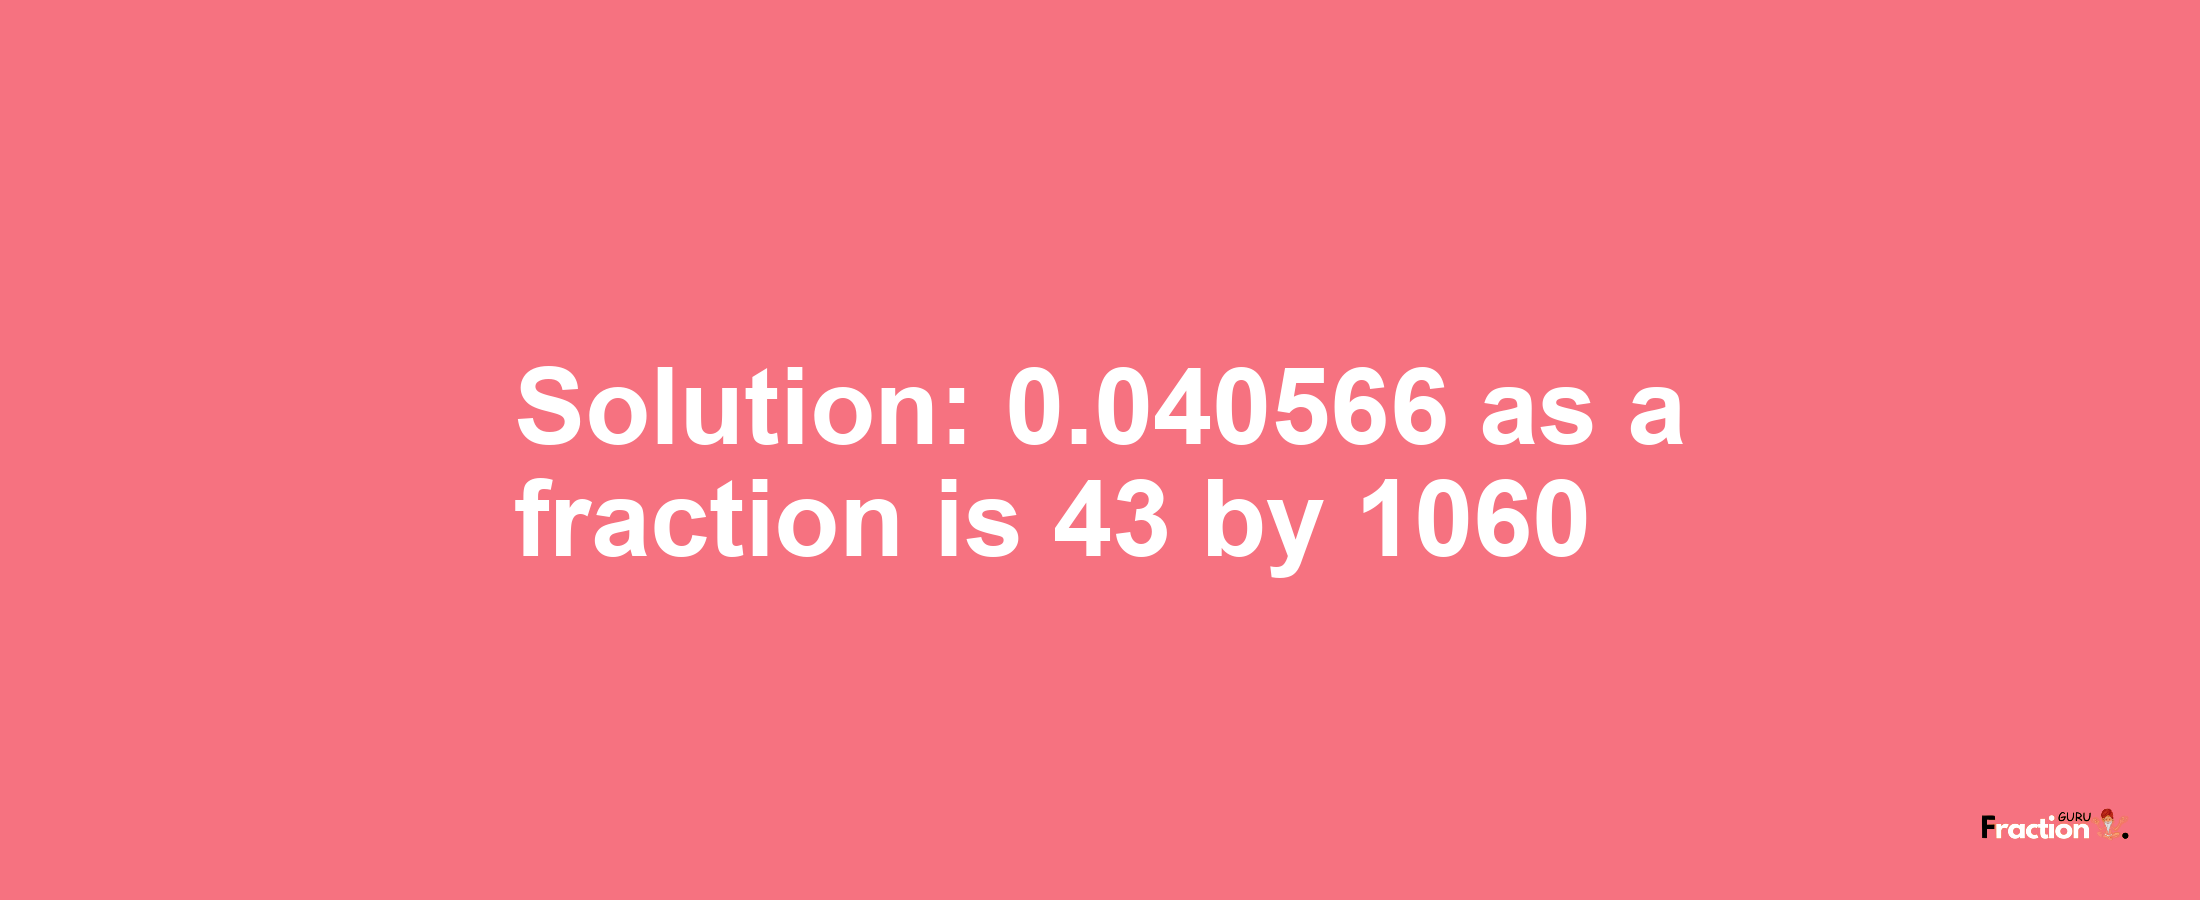 Solution:0.040566 as a fraction is 43/1060